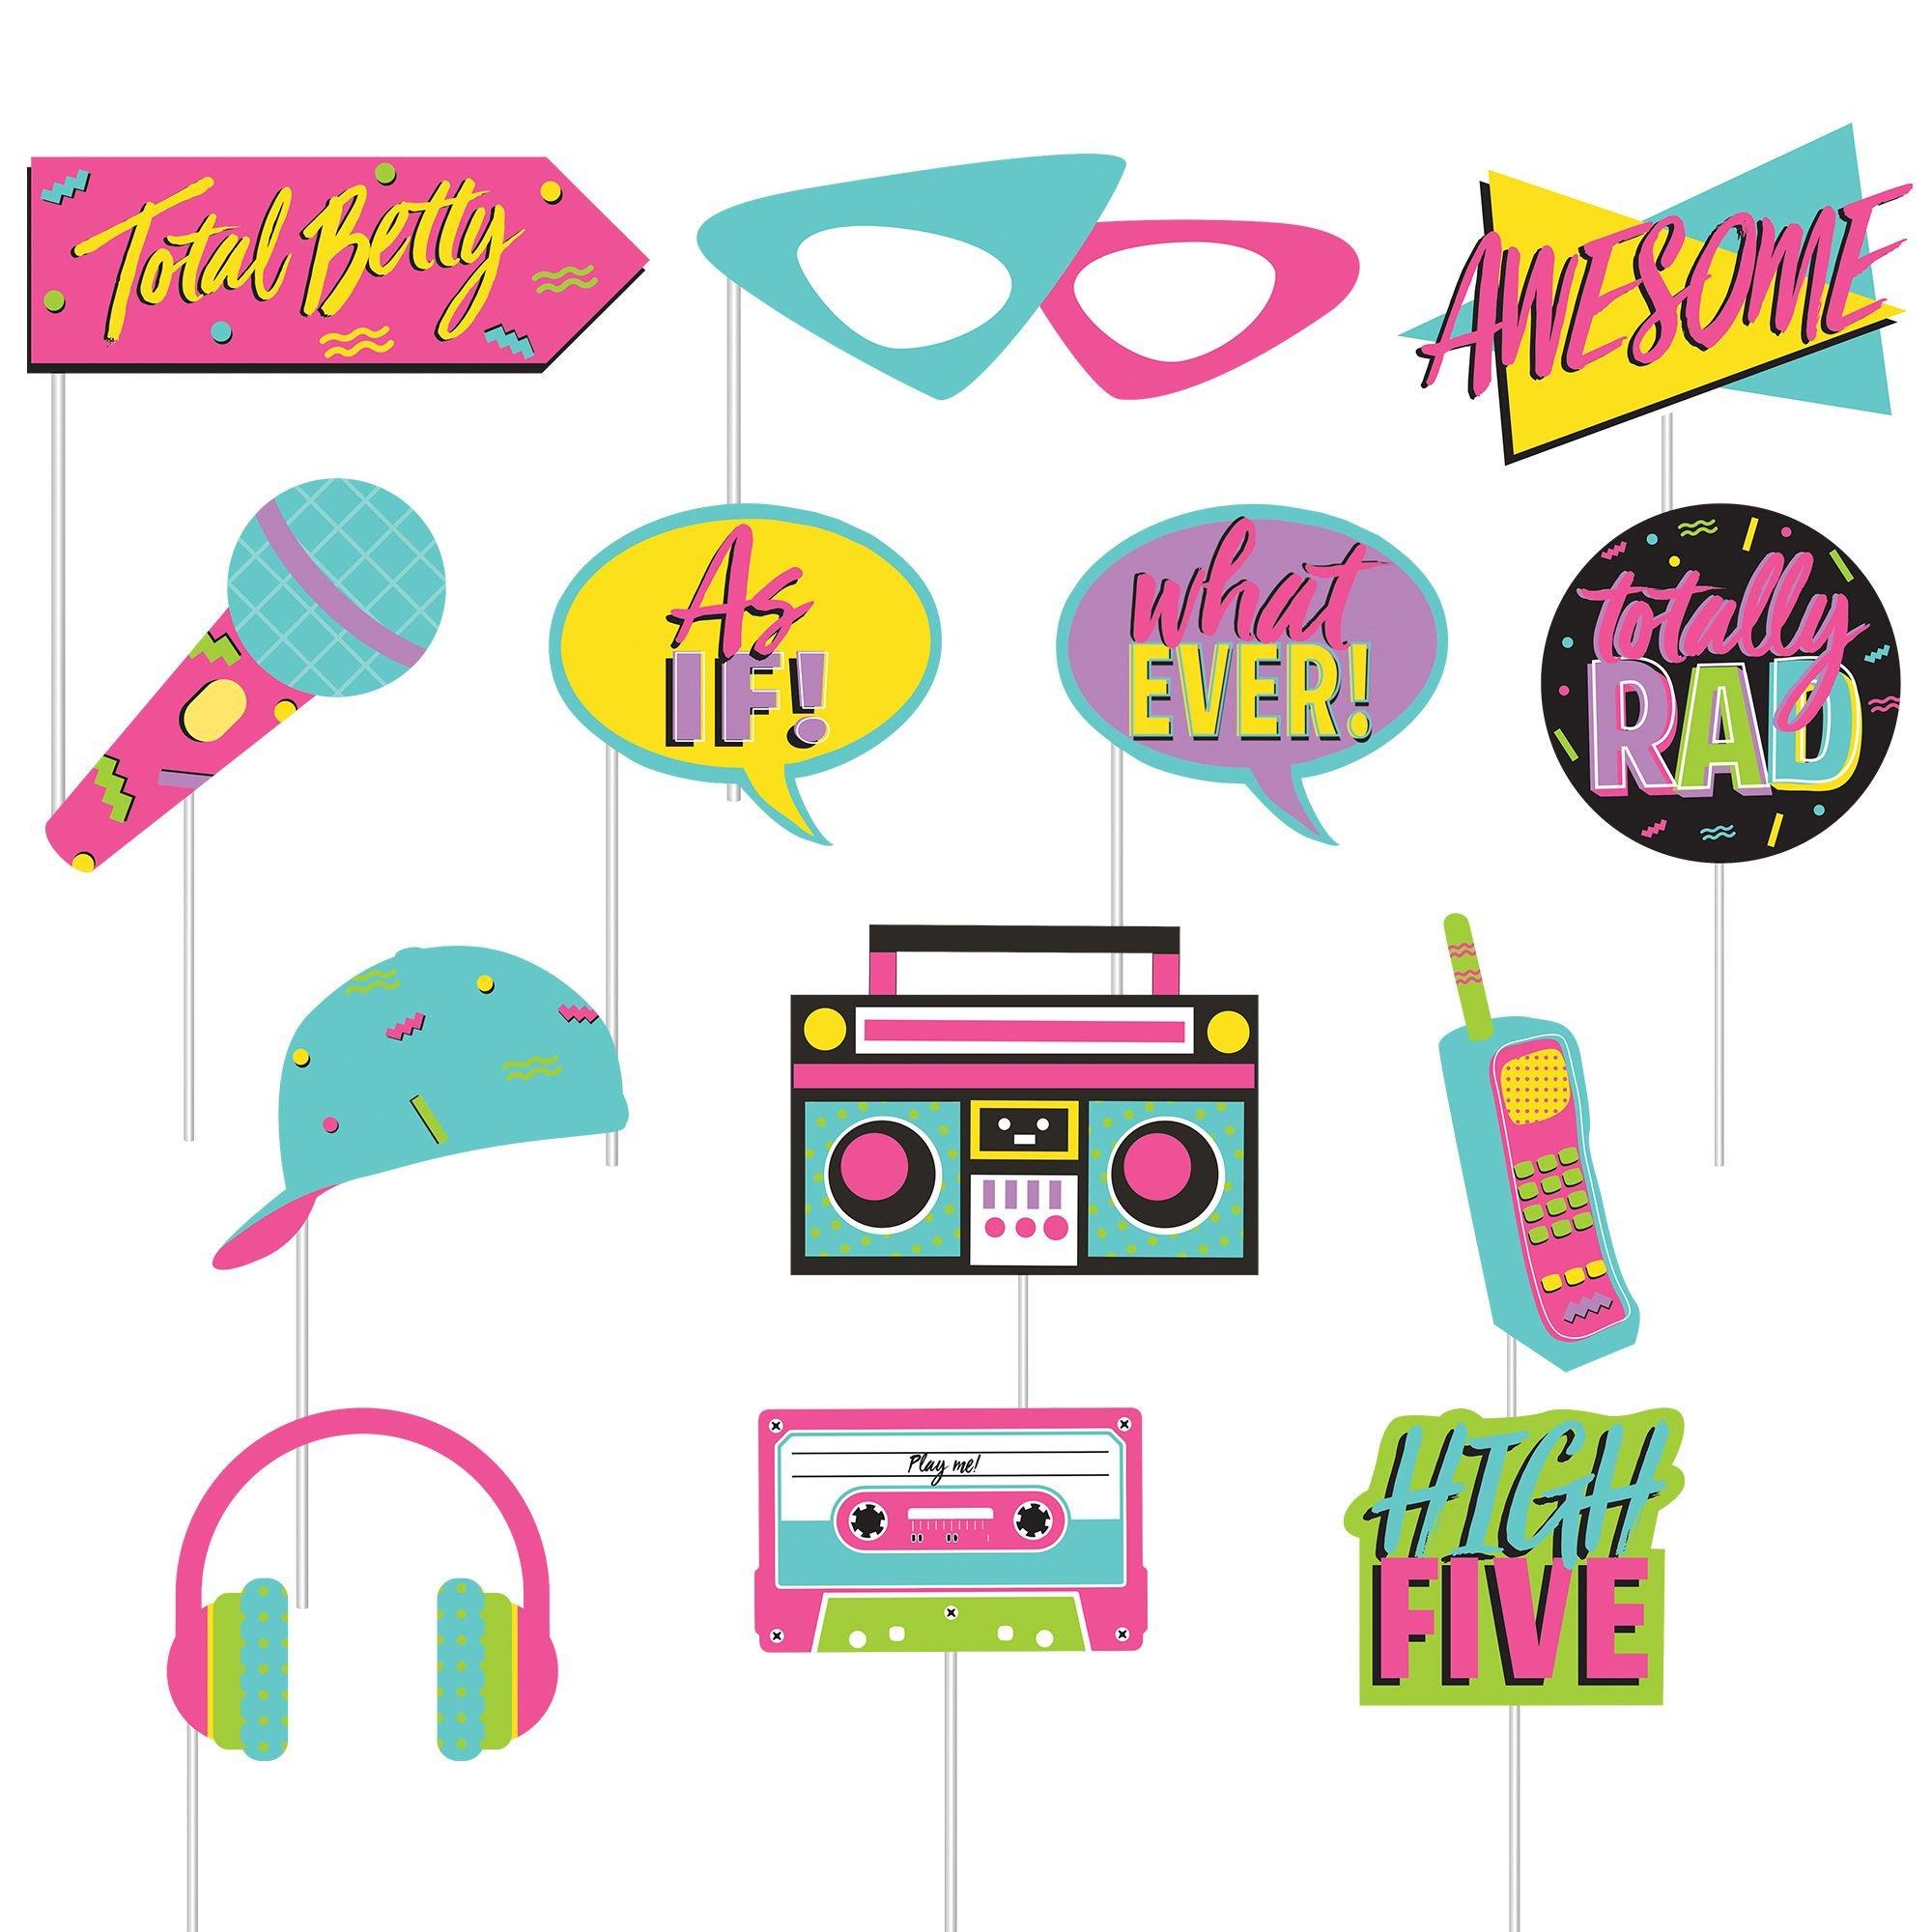 Awesome 80s Scene Setter With Photo Booth Props Party City